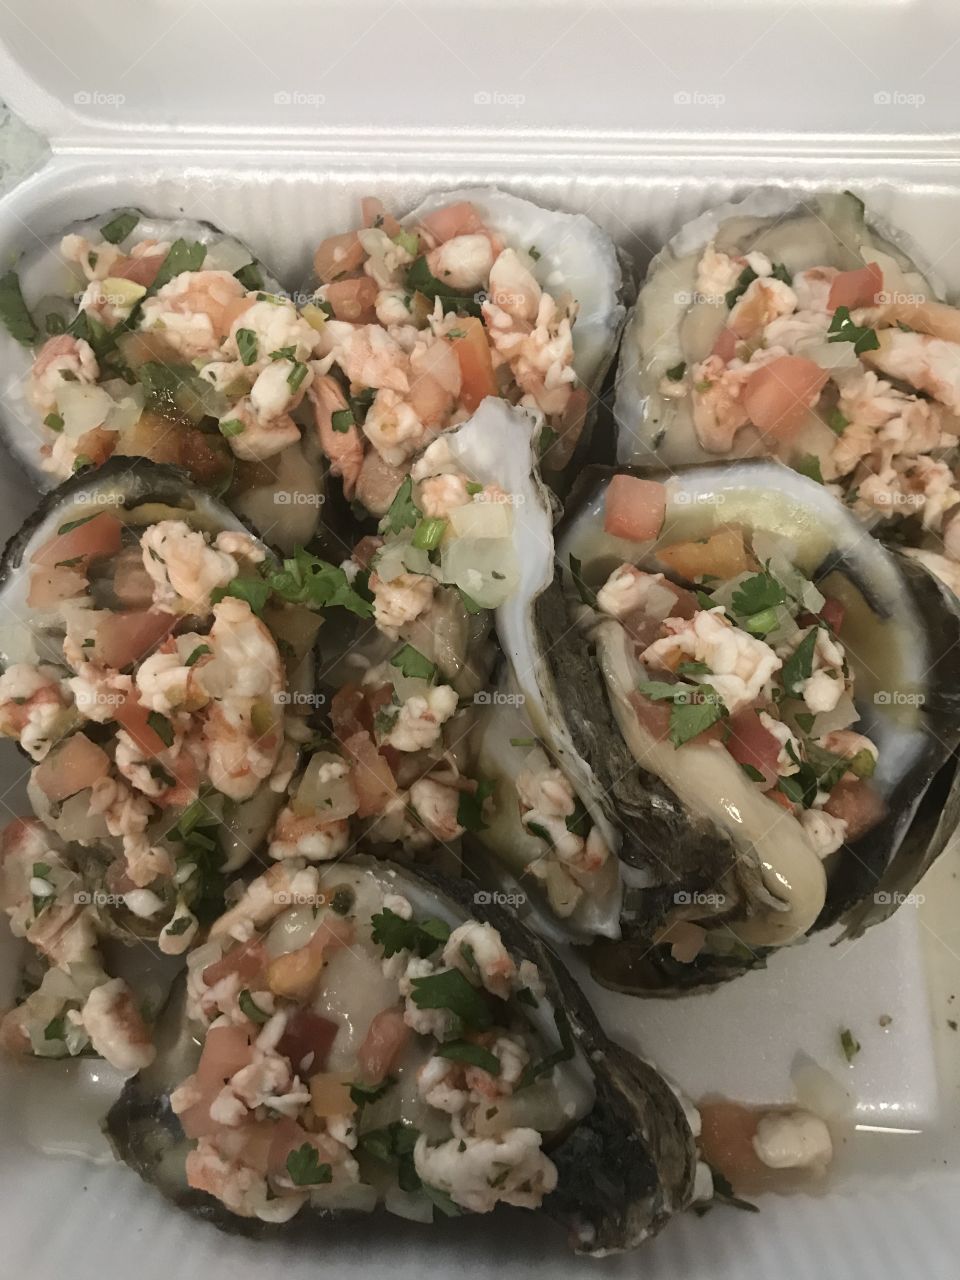 Oysters with ceviche